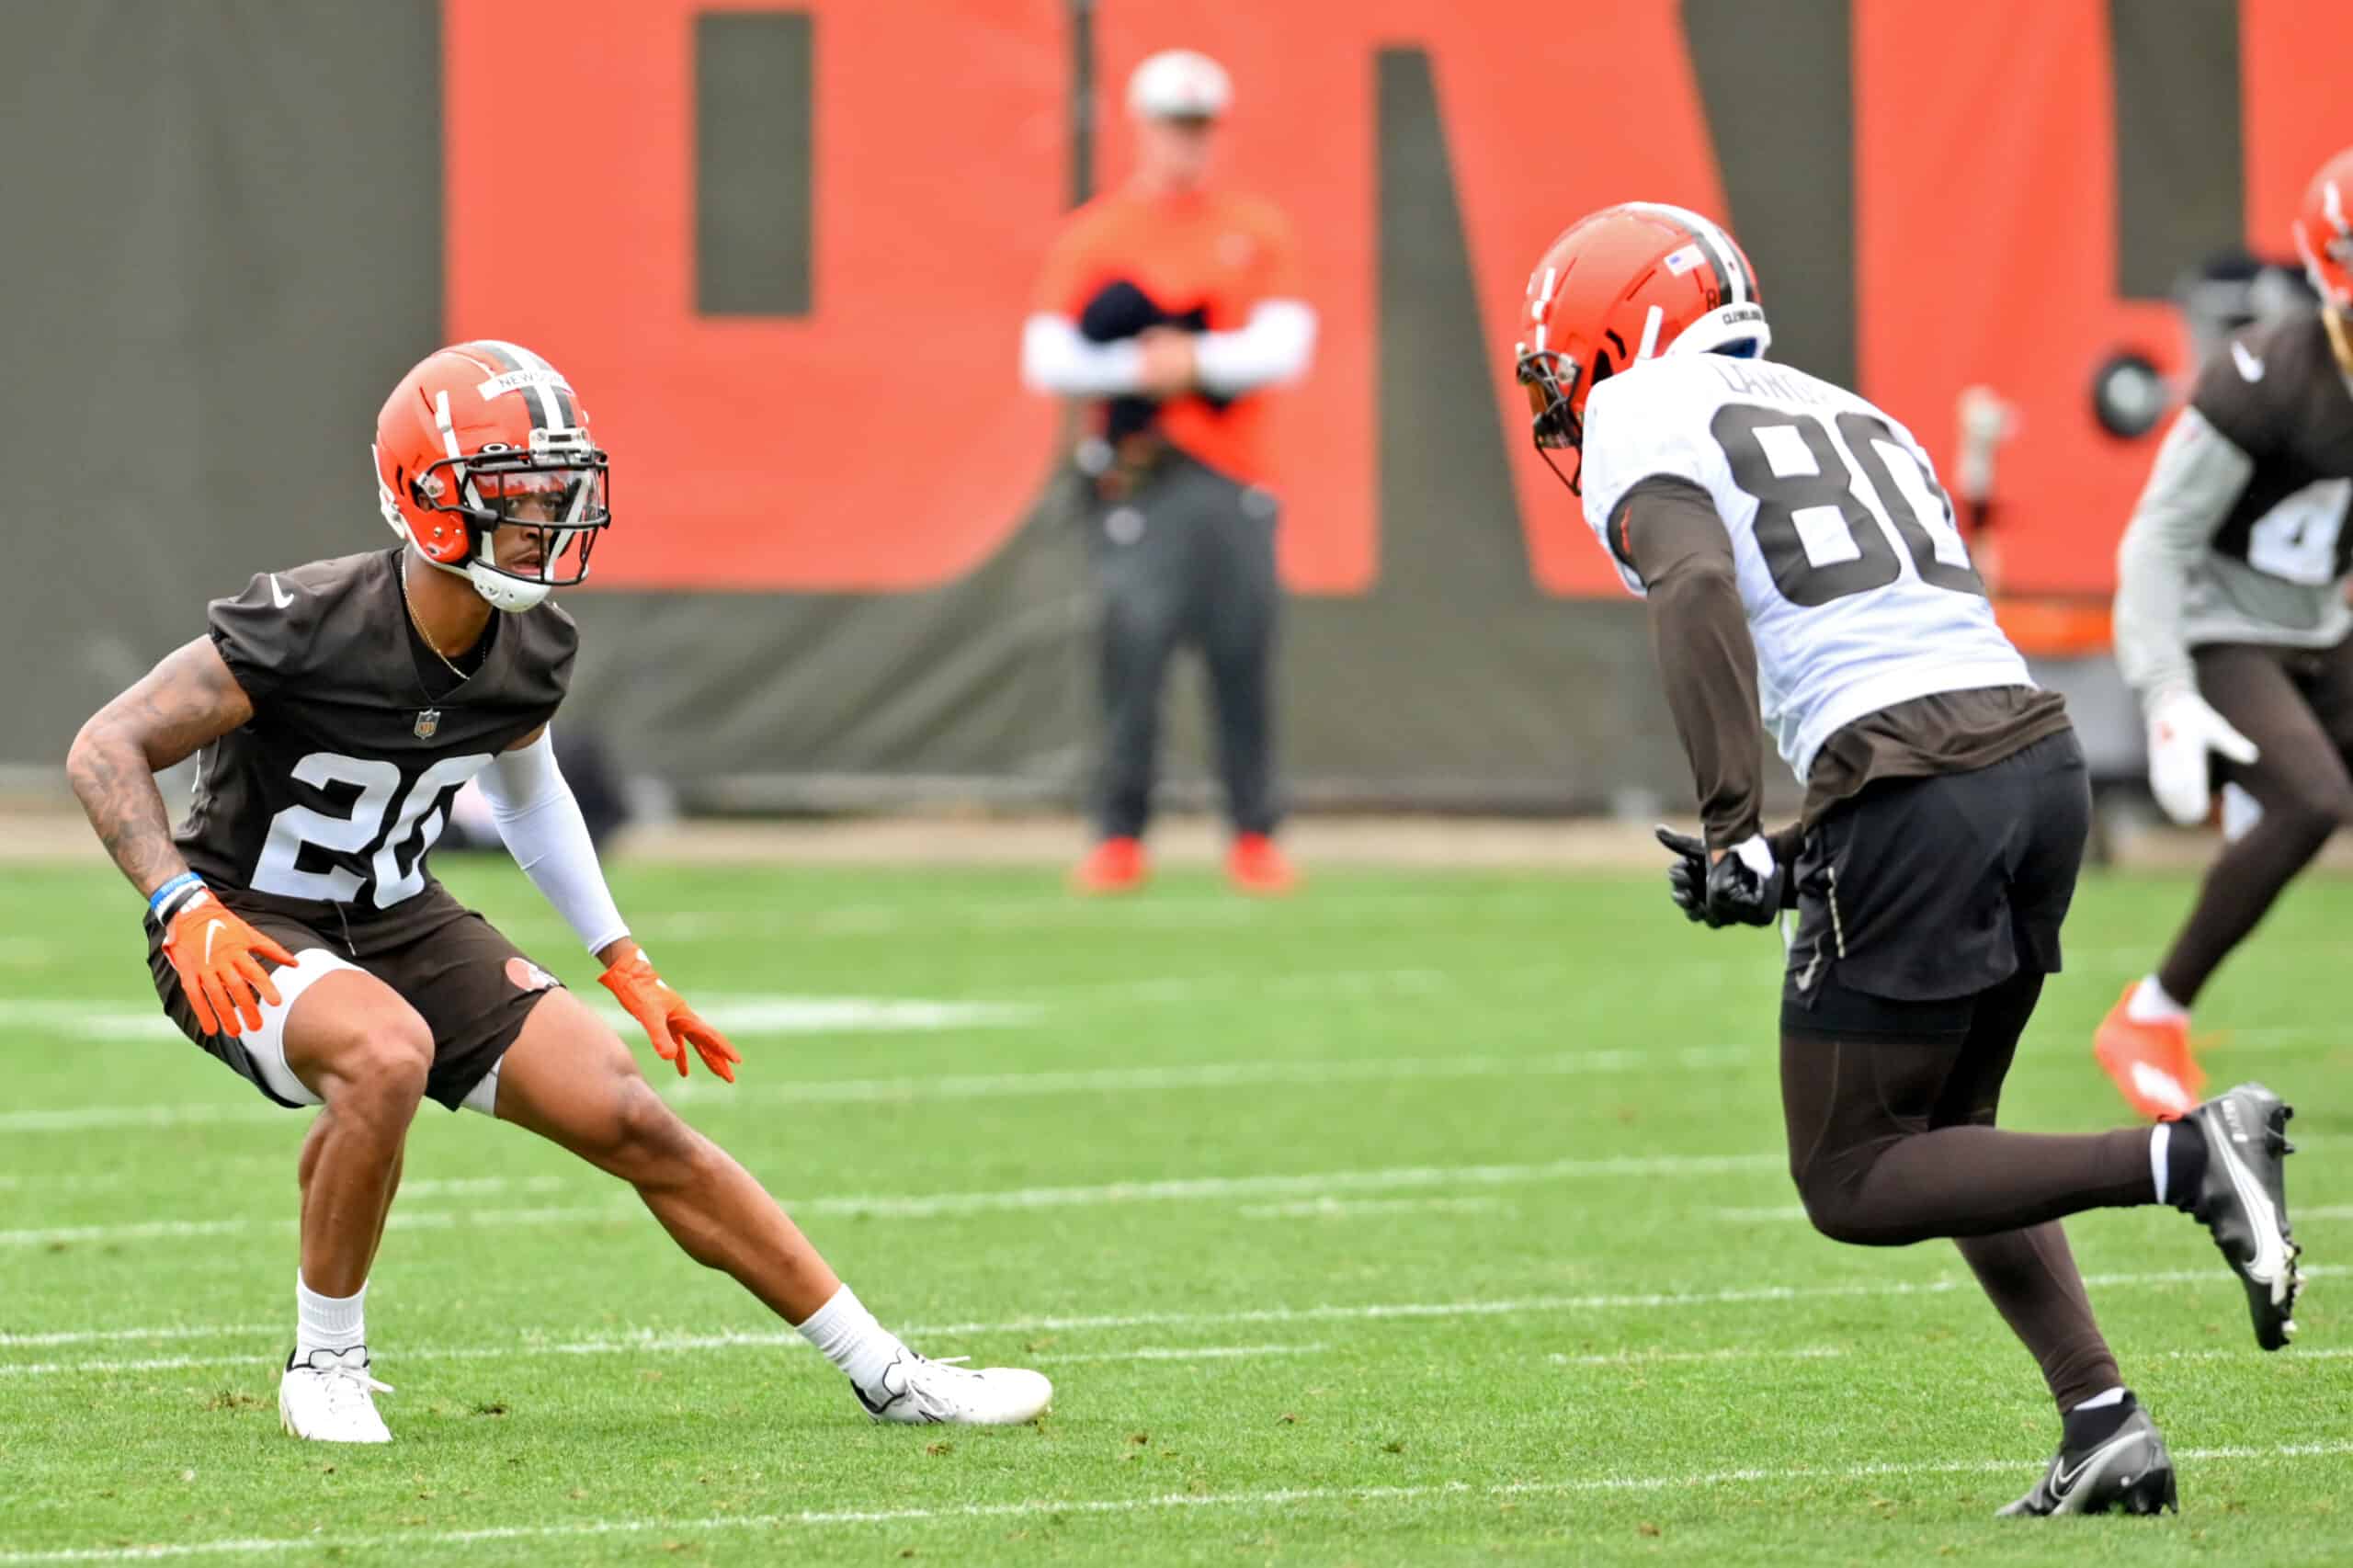 Cornerback Greg Newsome II #20 of the Cleveland Browns covers wide receiver Jarvis Landry #80 during the second day of Cleveland Browns Training Camp on July 29, 2021 in Berea, Ohio. 